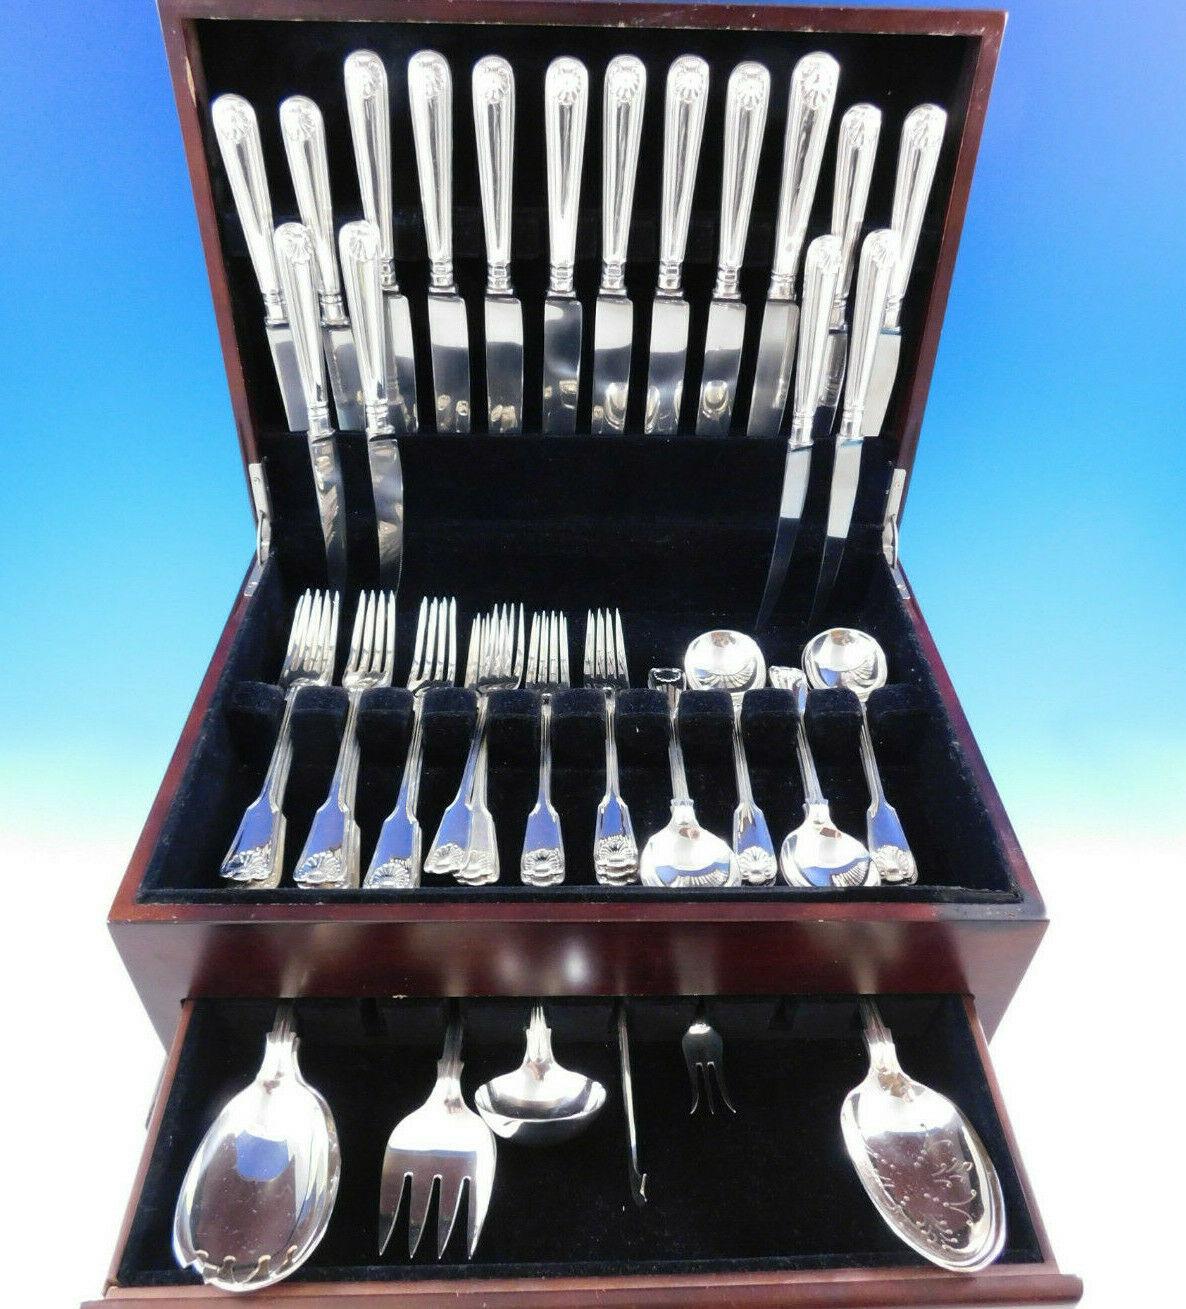 Superb fiddle thread & shell by James Robinson sterling silver flatware set, 48 pieces. This set includes:

8 dinner size knives, 9 1/2